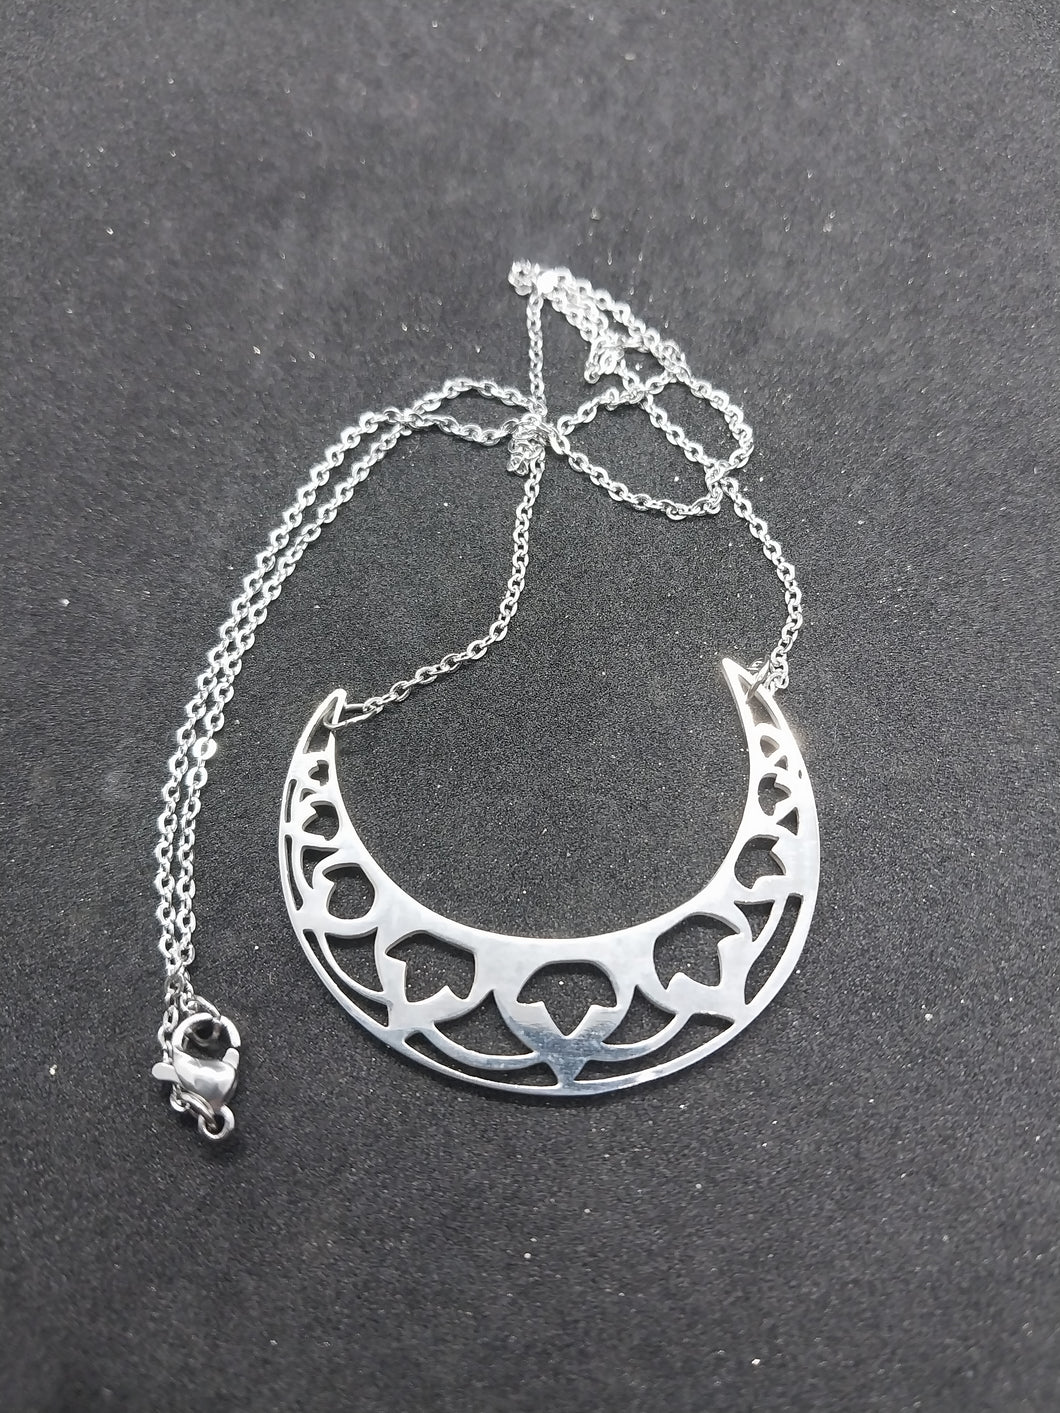 Stainless Steel Moon Flower Choker Necklace